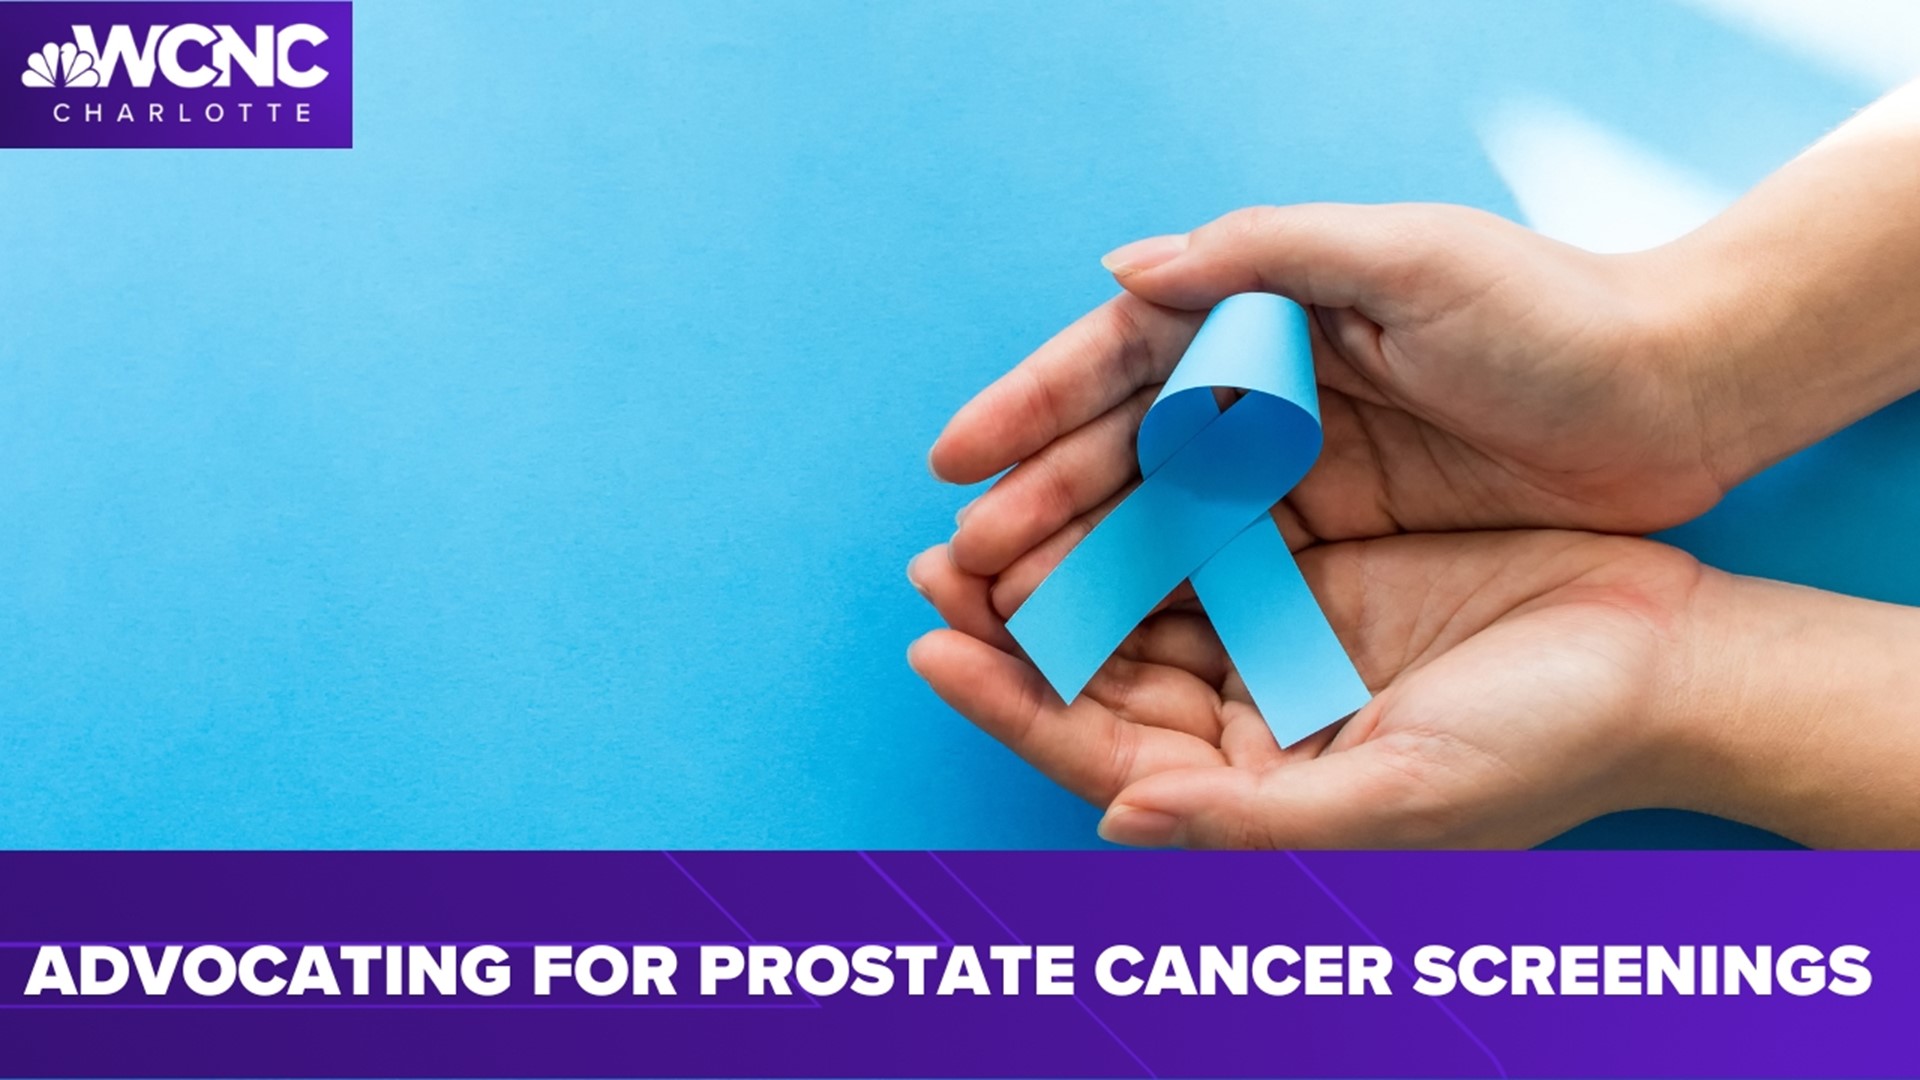 As September ends, so does Prostate Cancer Awareness Month. Charlotte-area doctors are hoping men remain vigilant with their screenings.